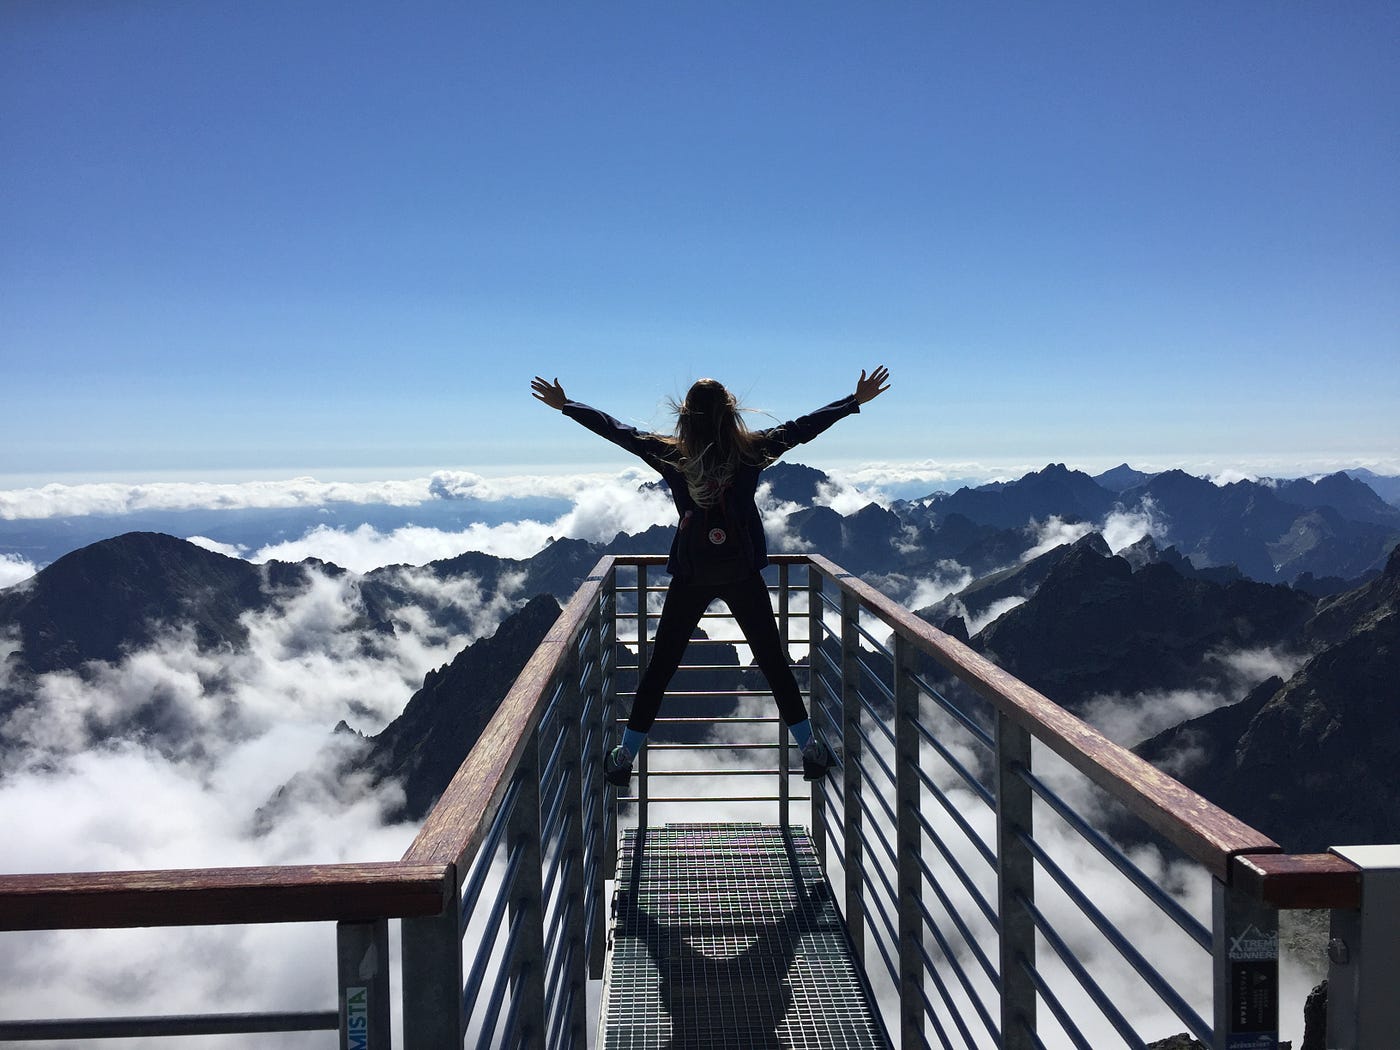 A woman triumphantly stands on a railing viewing the vast cloudy mountains in front of her.